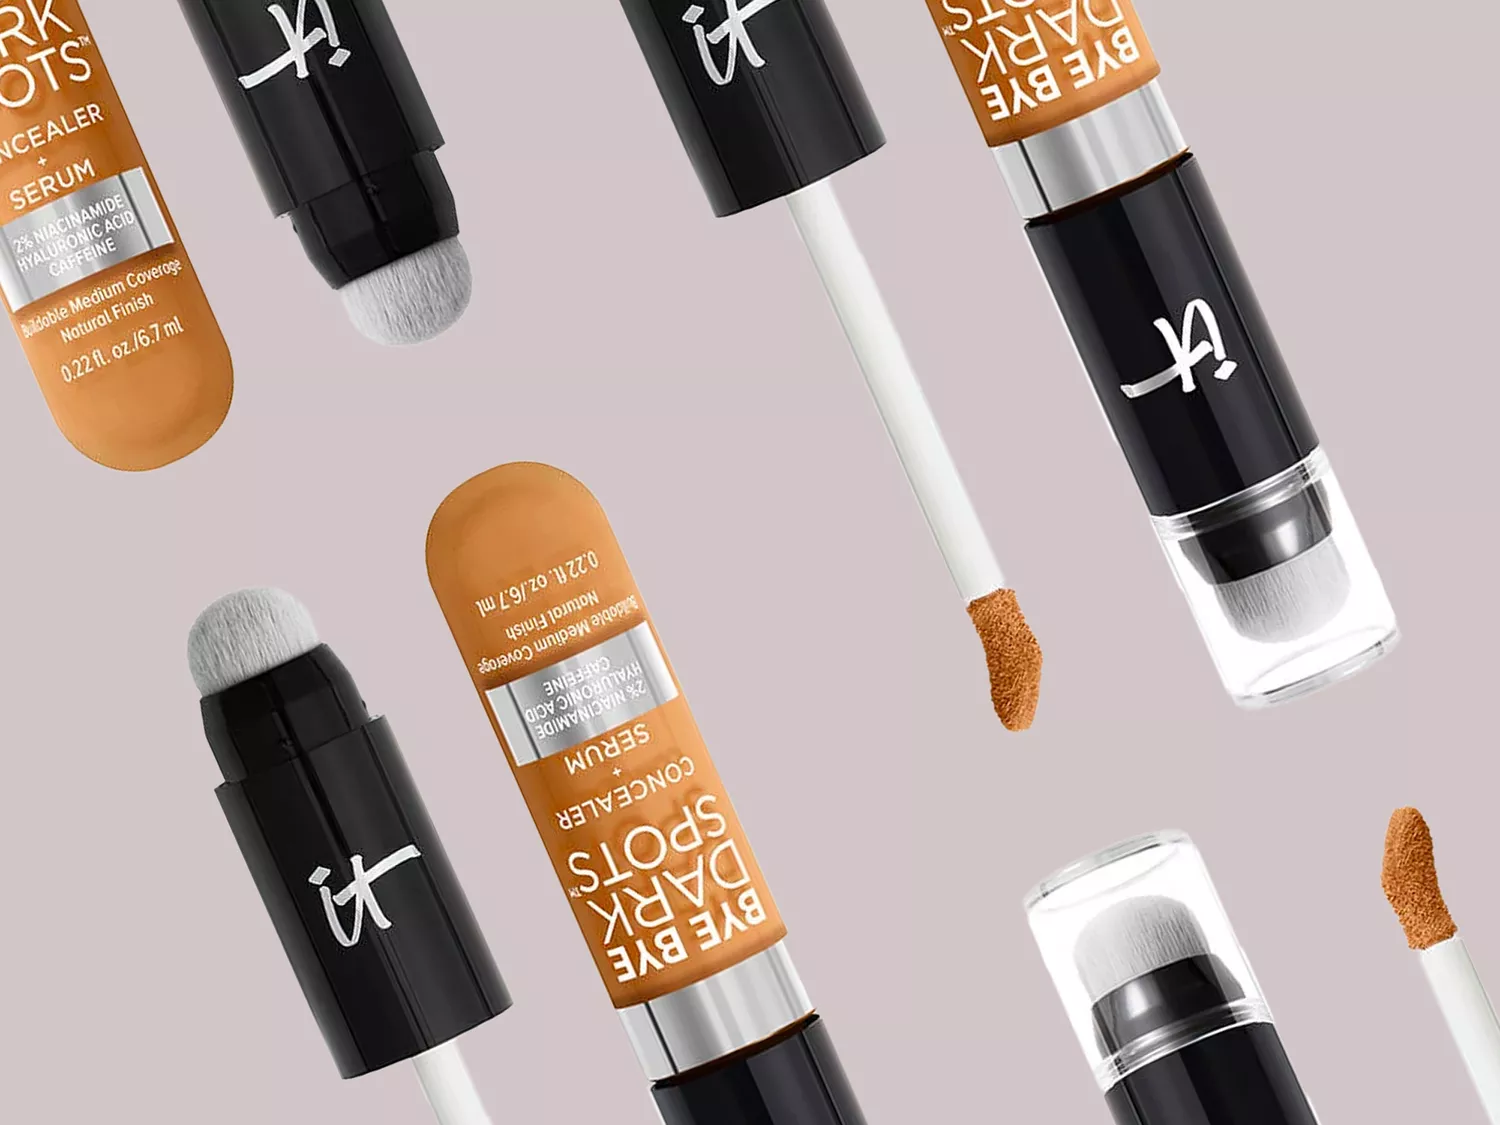 Shoppers With Hyperpigmentation Say This On-Sale Serum Concealer “Minimizes Dark Spots”